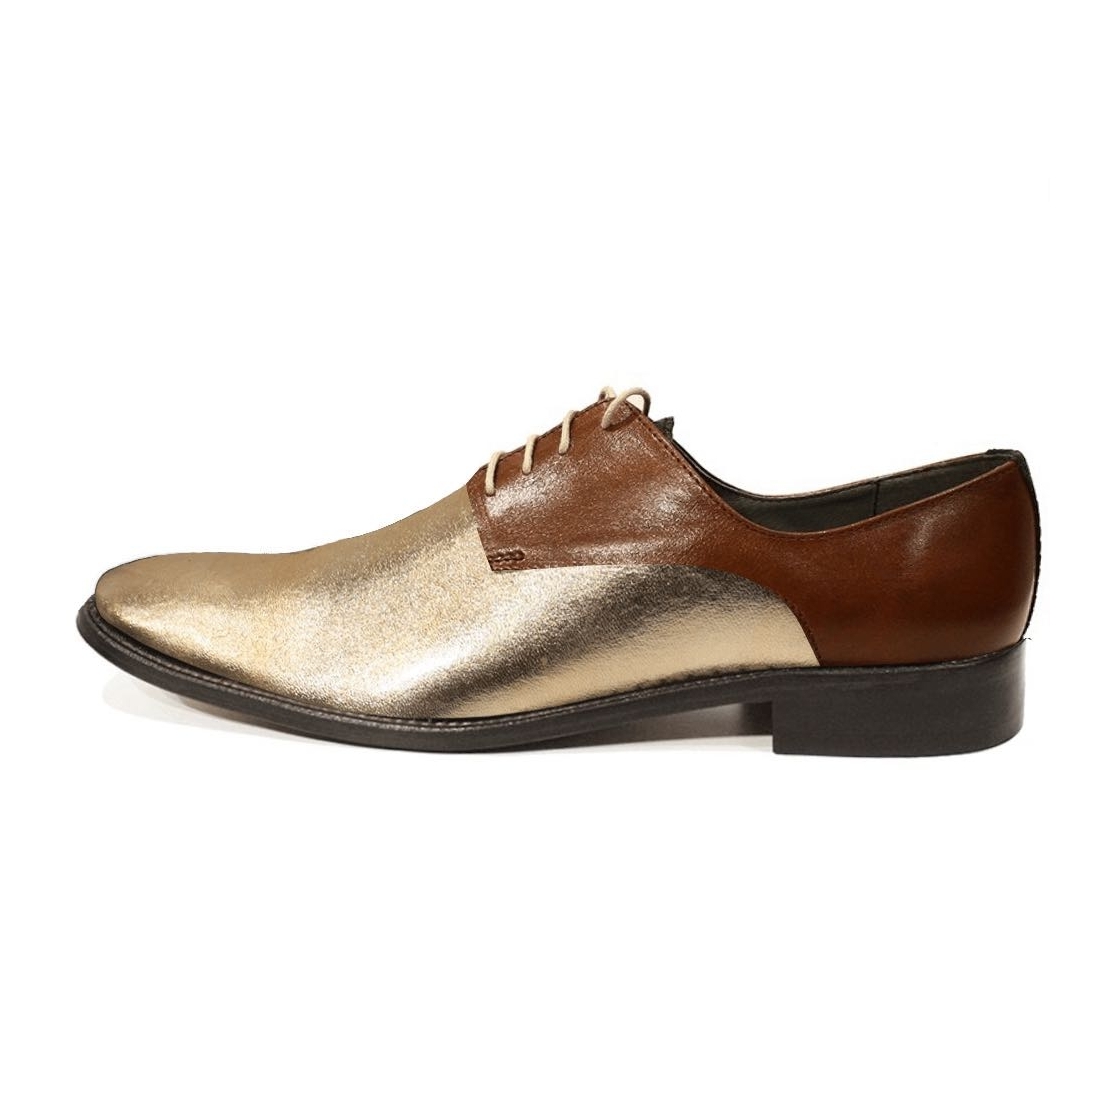 Modello Ronedorra - Classic Shoes - Handmade Colorful Italian Leather Shoes